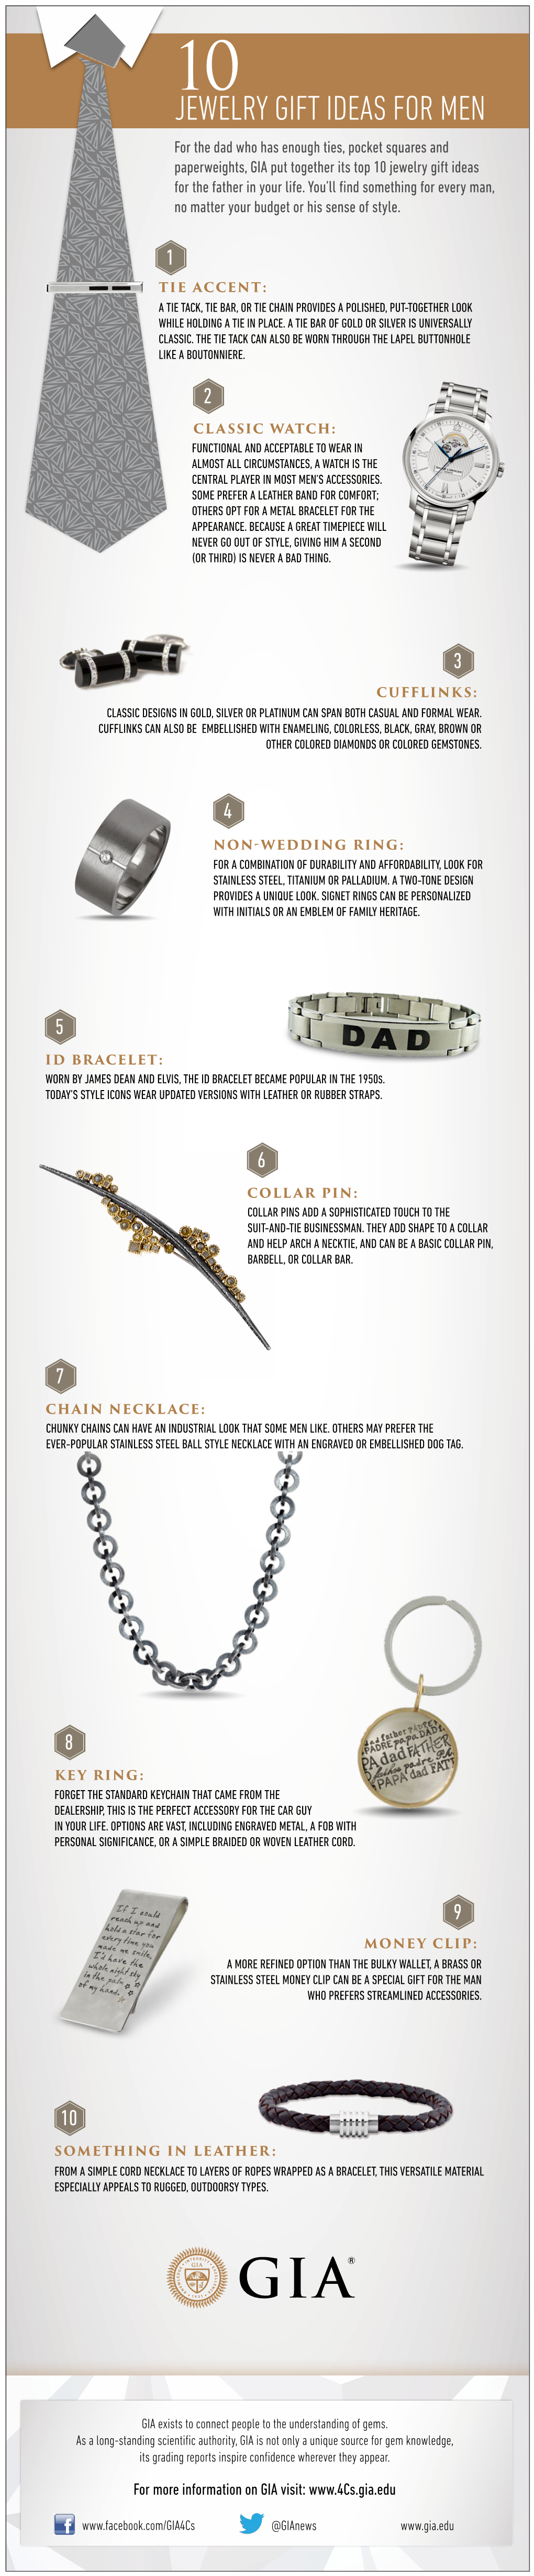 Top 10 Jewelry Gift Ideas for Men